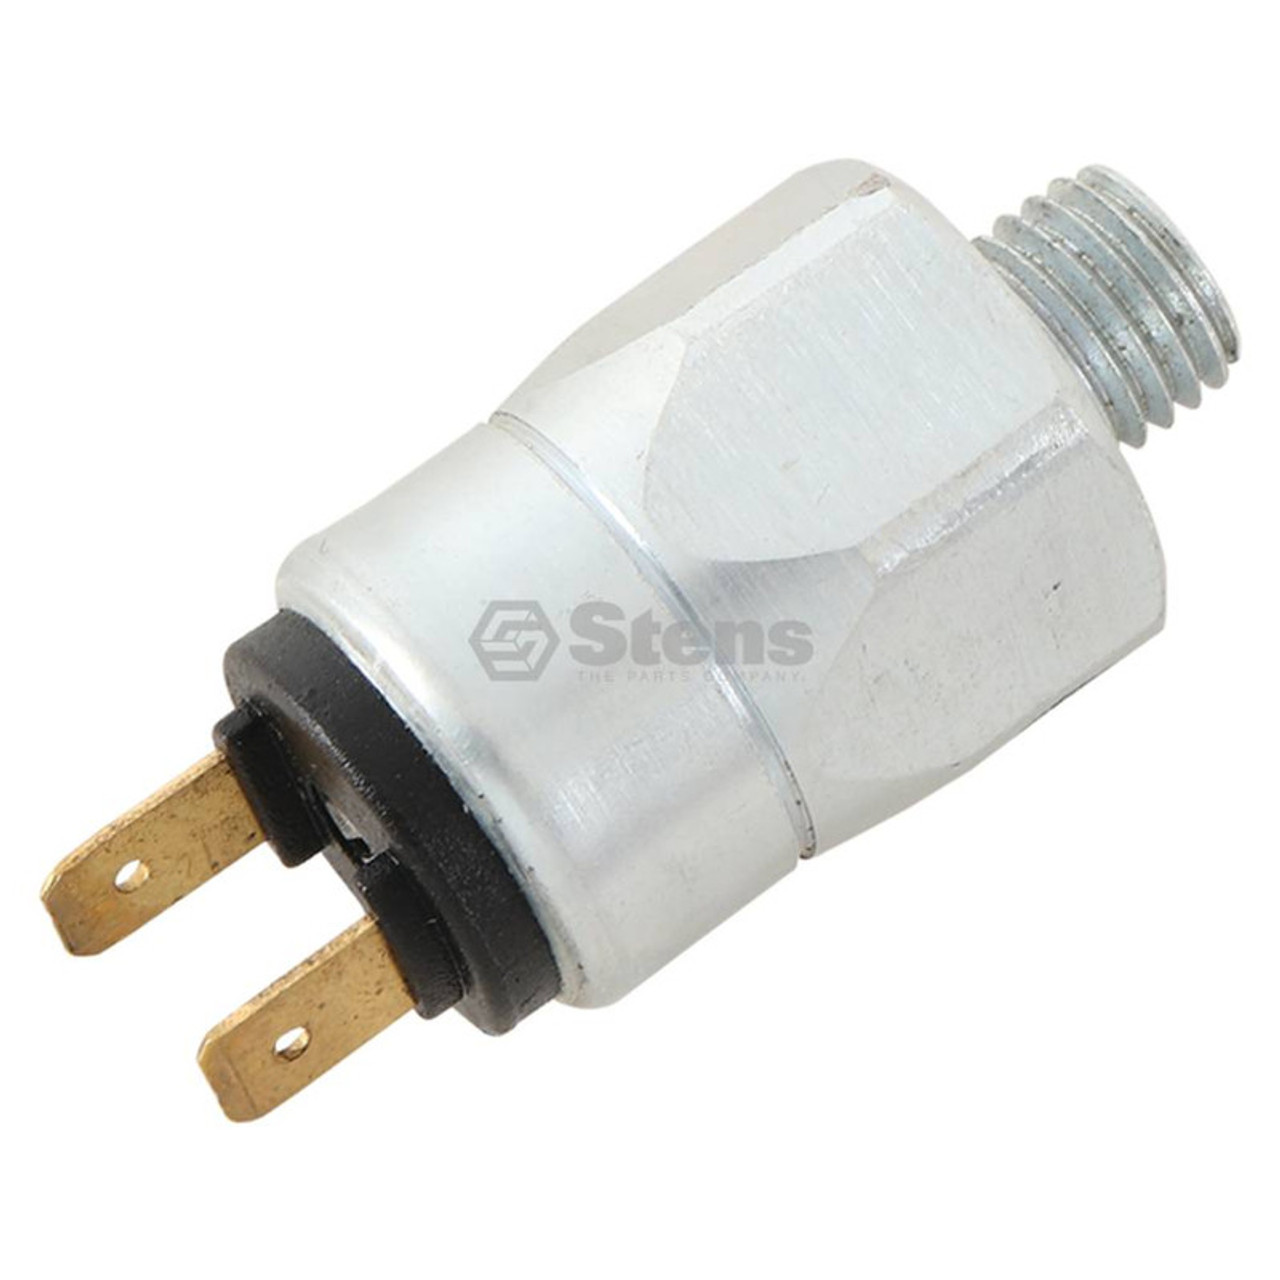 Oil Pressure Switch for Ford New Holland T5040, T5050, T5060, TL100A, TL80A, TL90A Tractor 47134924, 5097529, 5097832, 87494631